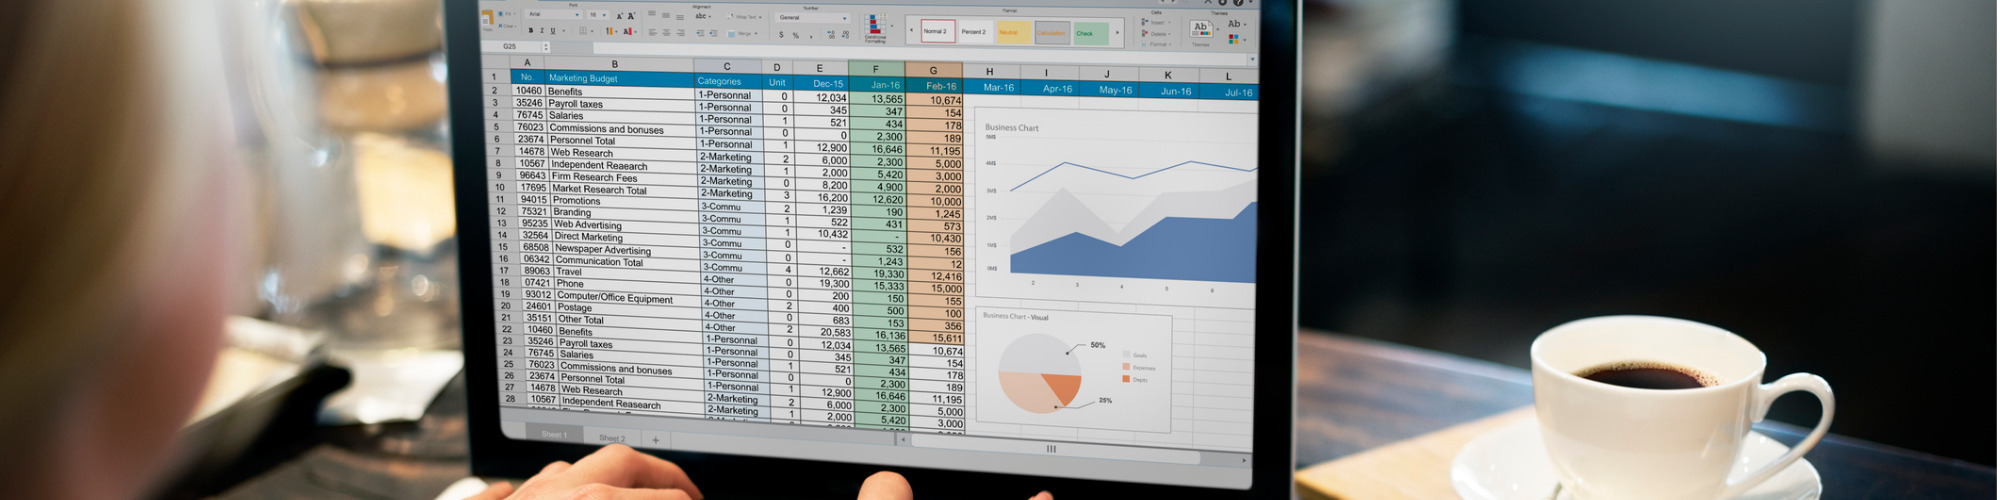 Excel for Professionals - All the Essential Skills Needed to Advance 